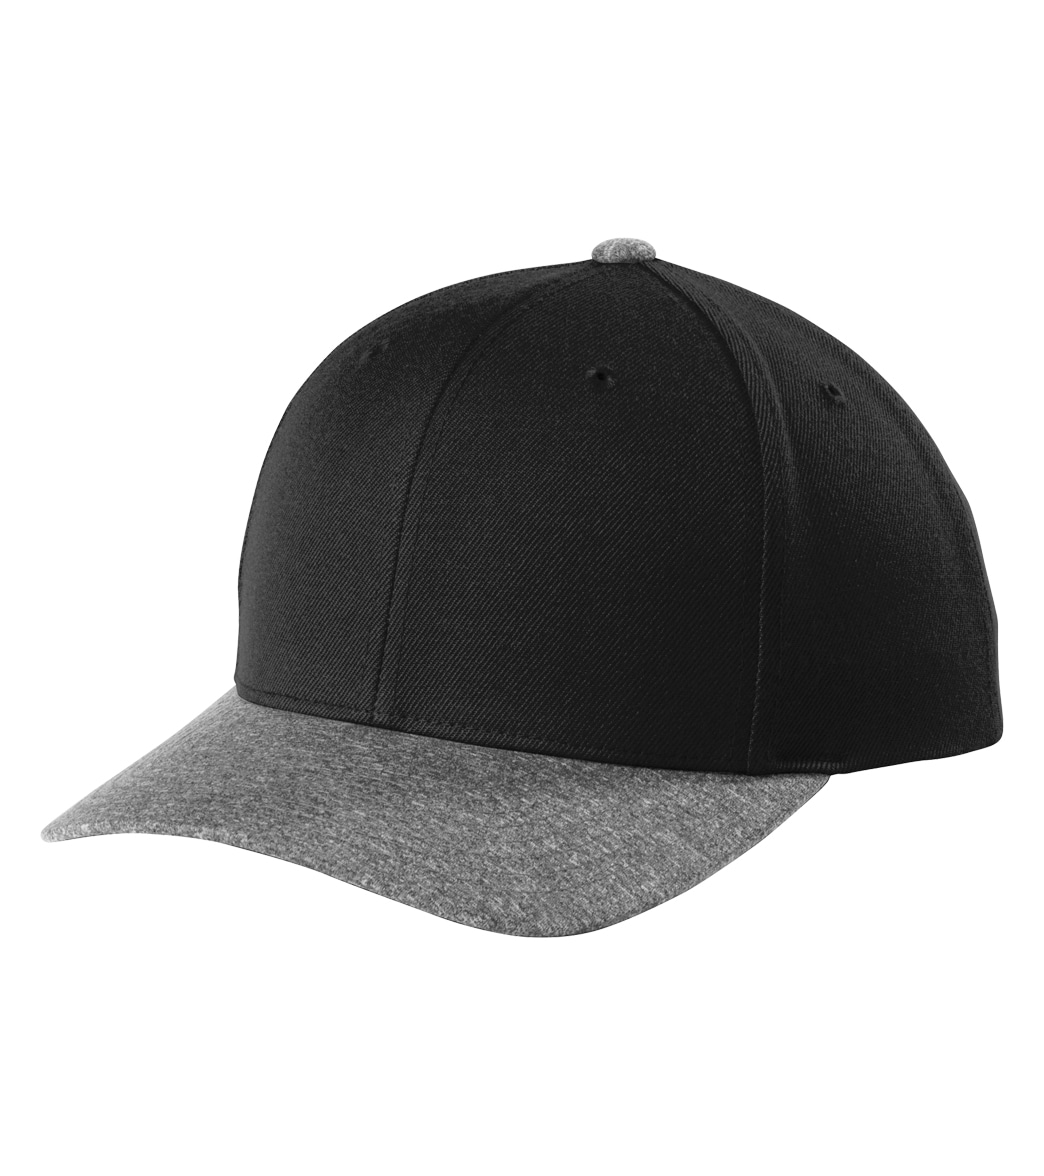 Structured Snapback Hat - Black/Grey Heather One Size - Swimoutlet.com